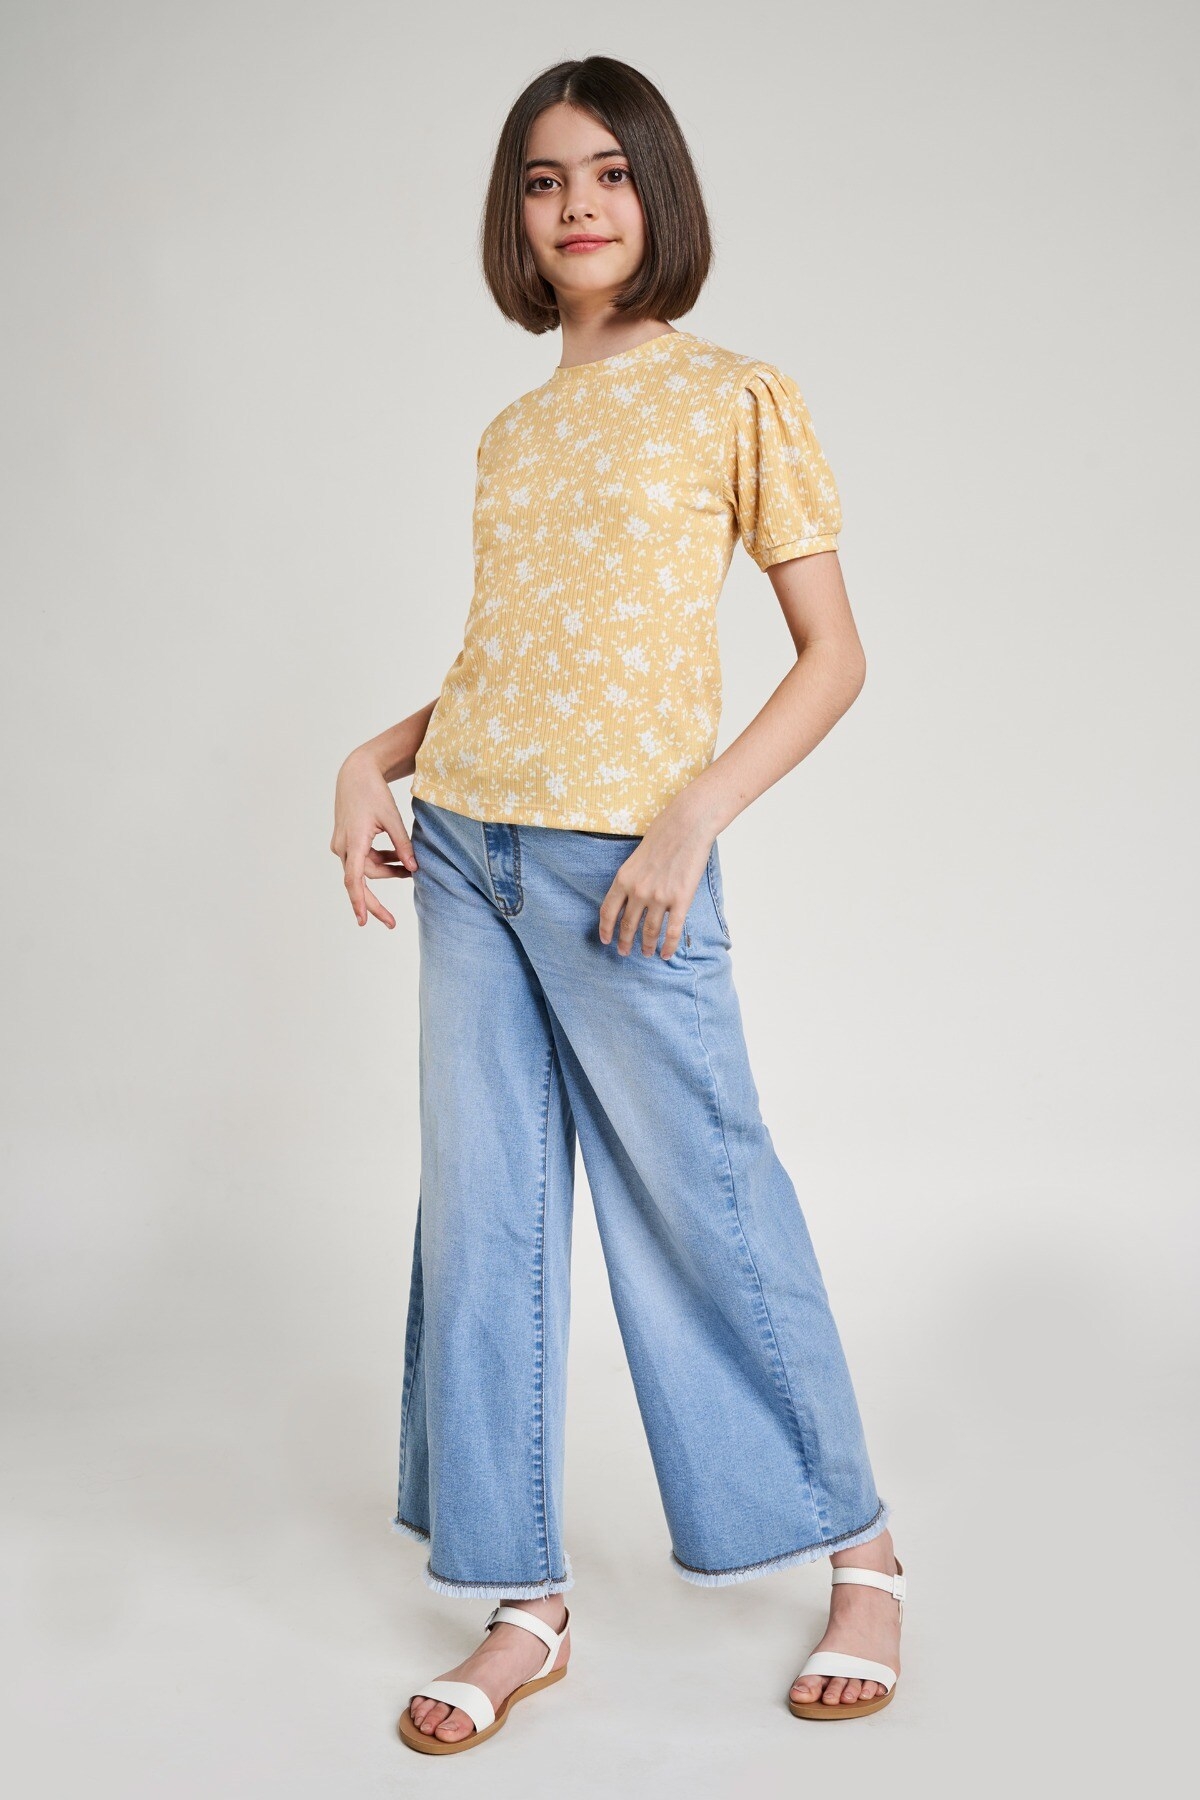 AND | Yellow Floral Printed A-Line Top 2